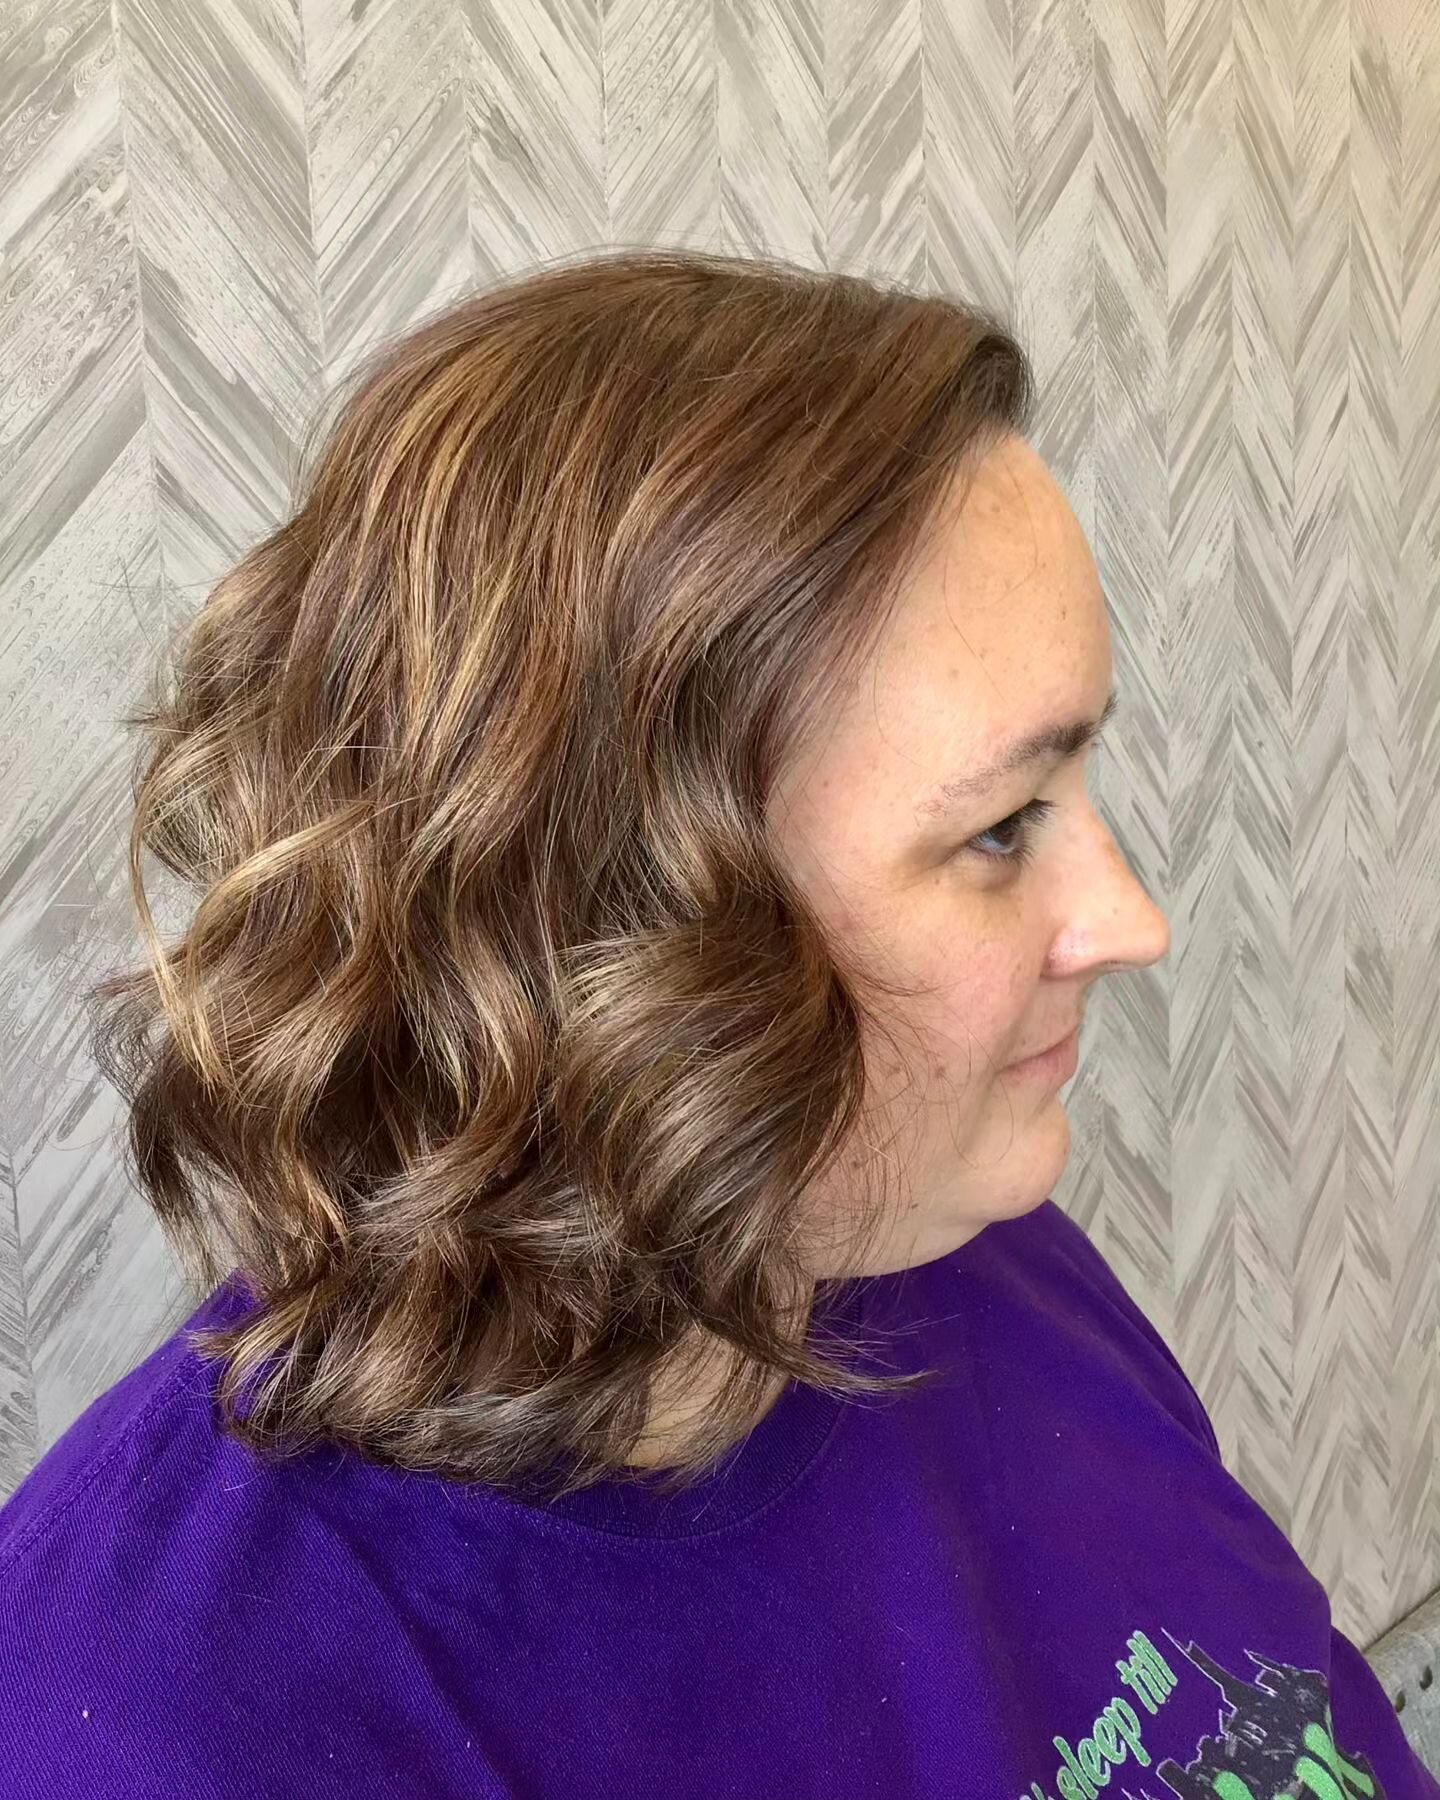 Danielle was tired of years of being red and doing her color at home. So, to help embrace her natural color and help with gray blending, we neutralized the red and popped in some highlights. With a good chop and some curls, she's definitely refreshed